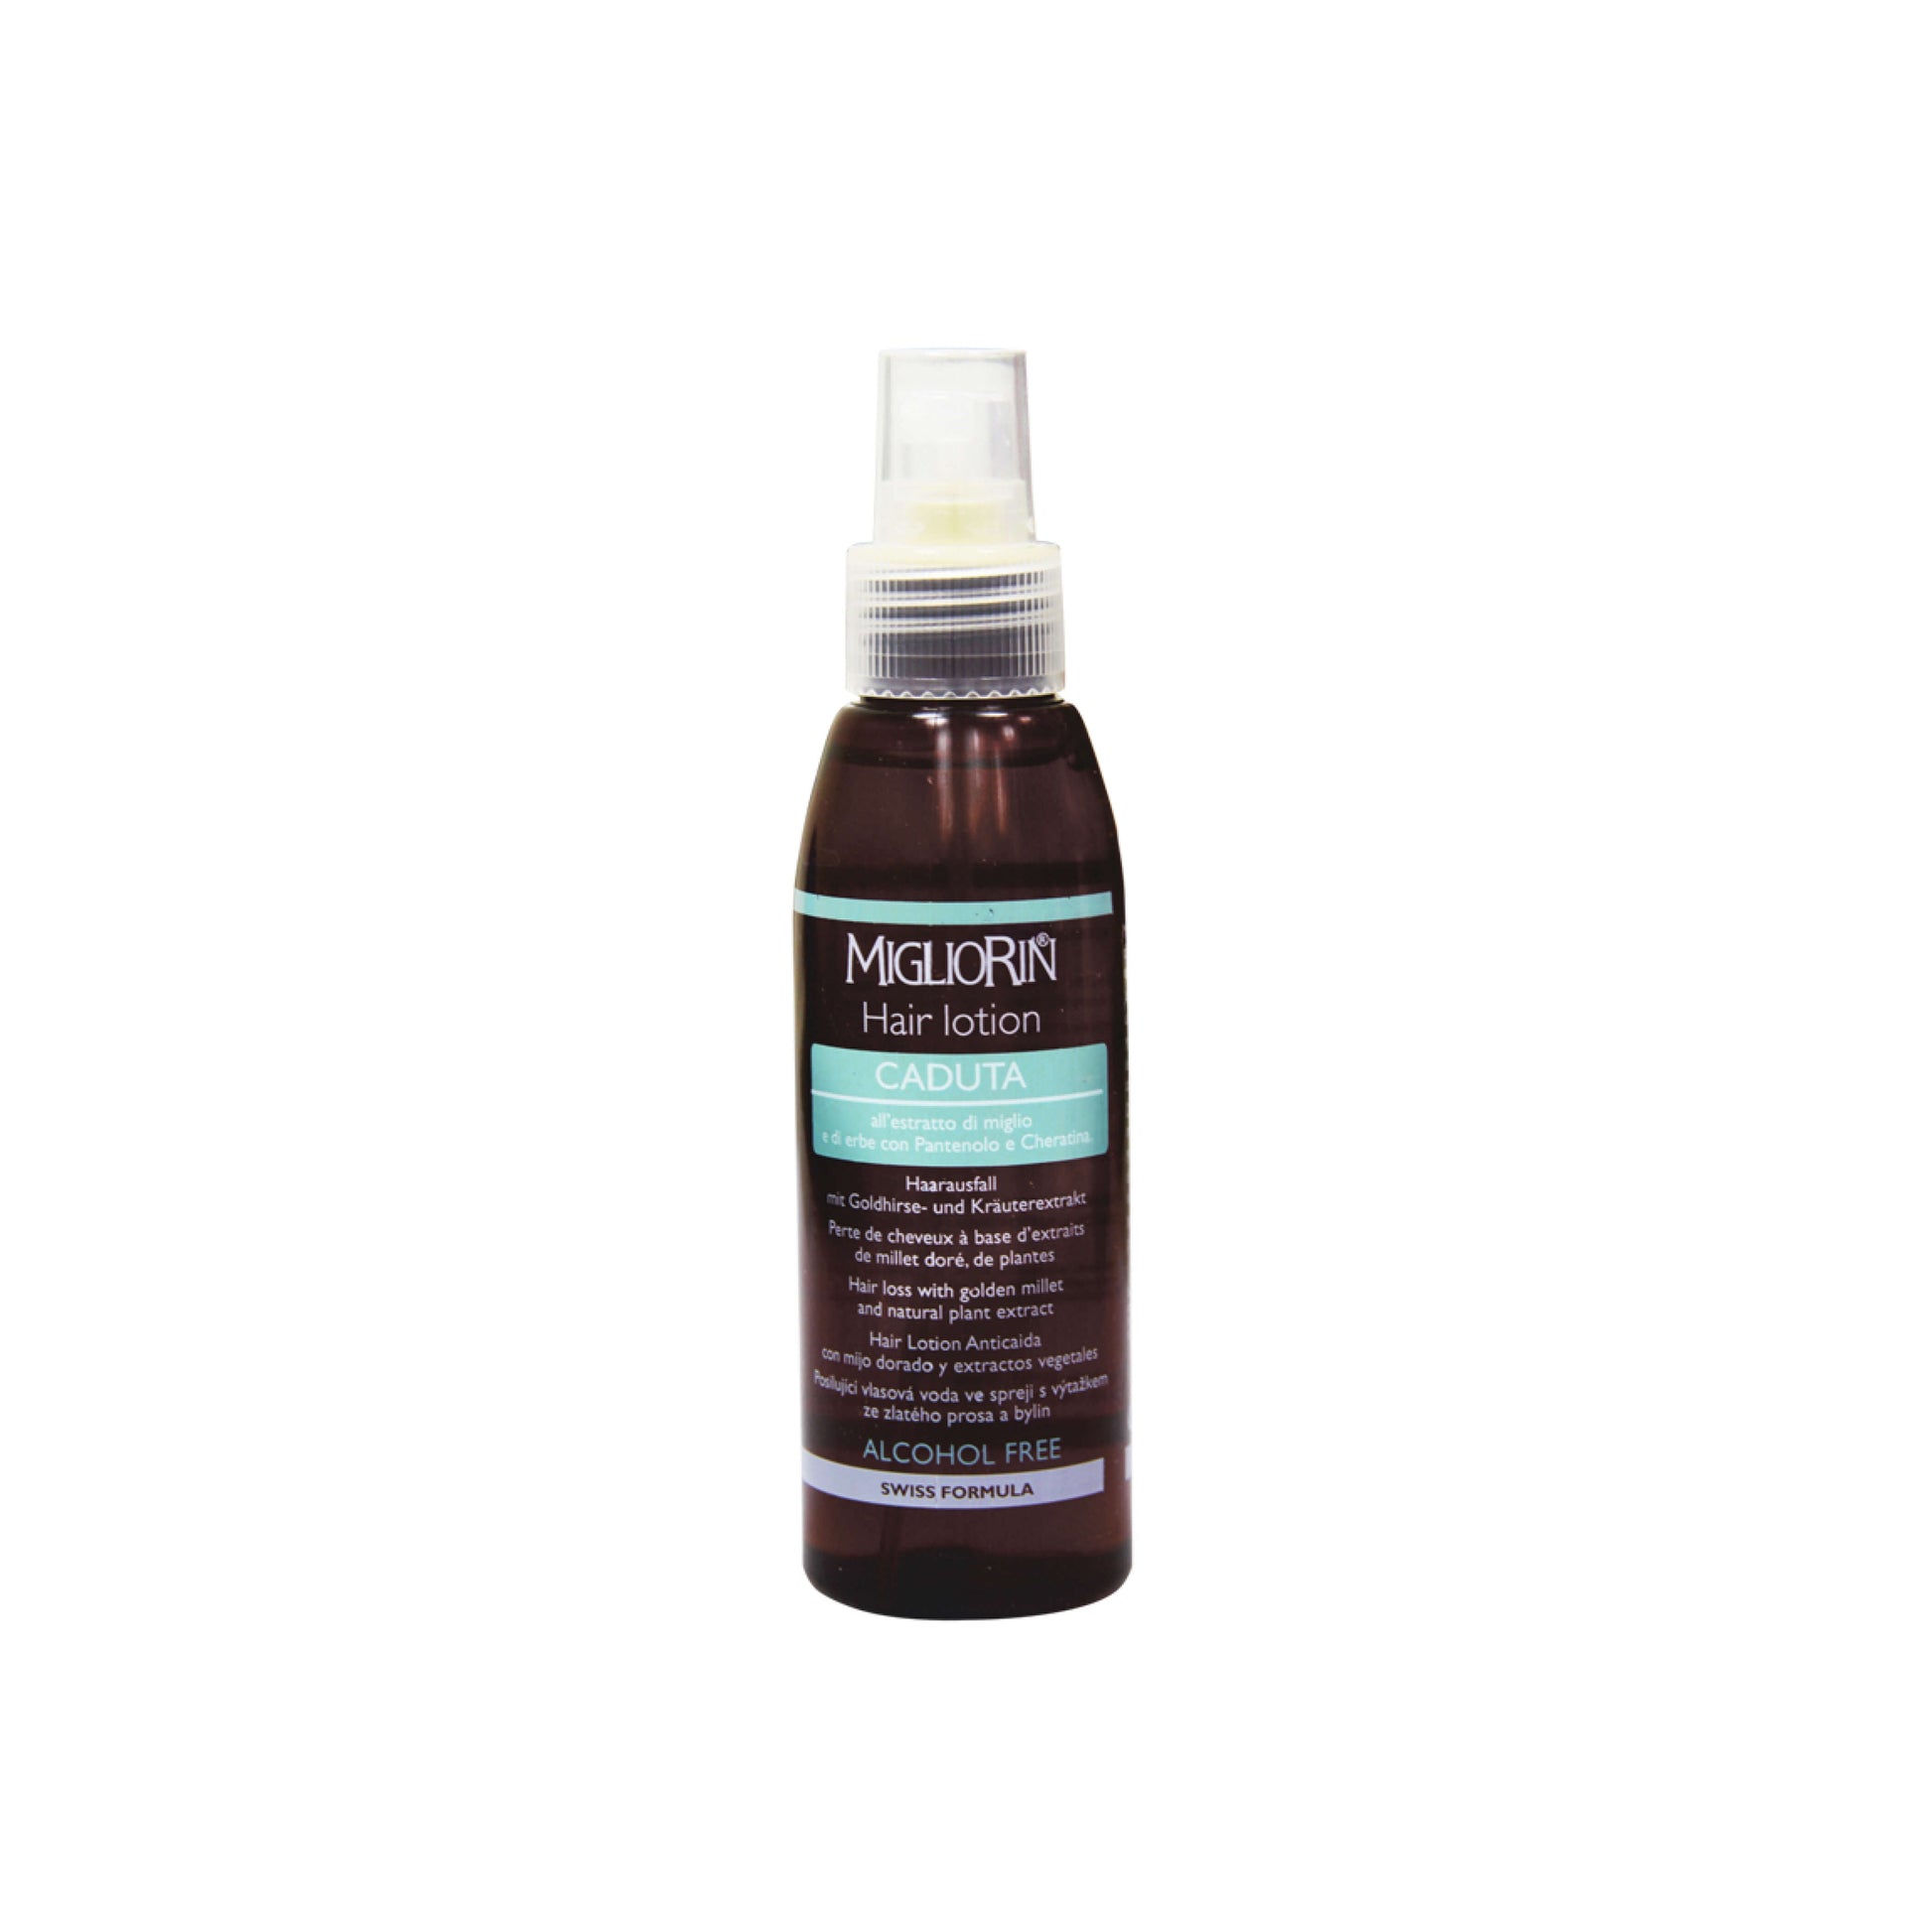 Migliorin spray lotion alcohol-free with Golden Millet, panthenol and keratin, 125ml